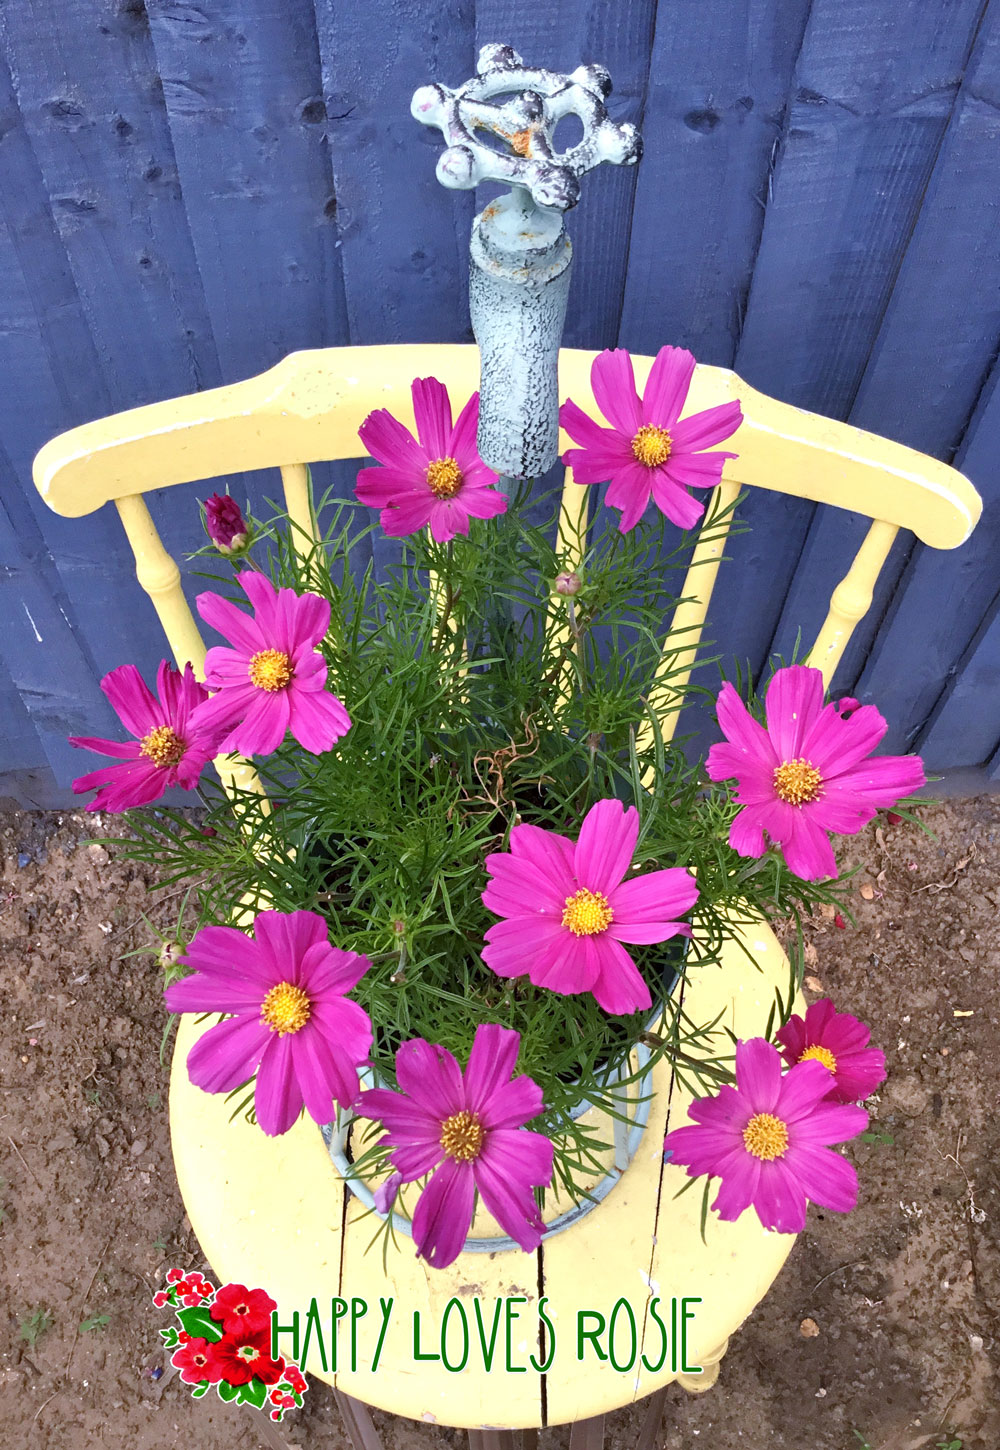 Pretty Pink Cosmos sitting on a yellow chair